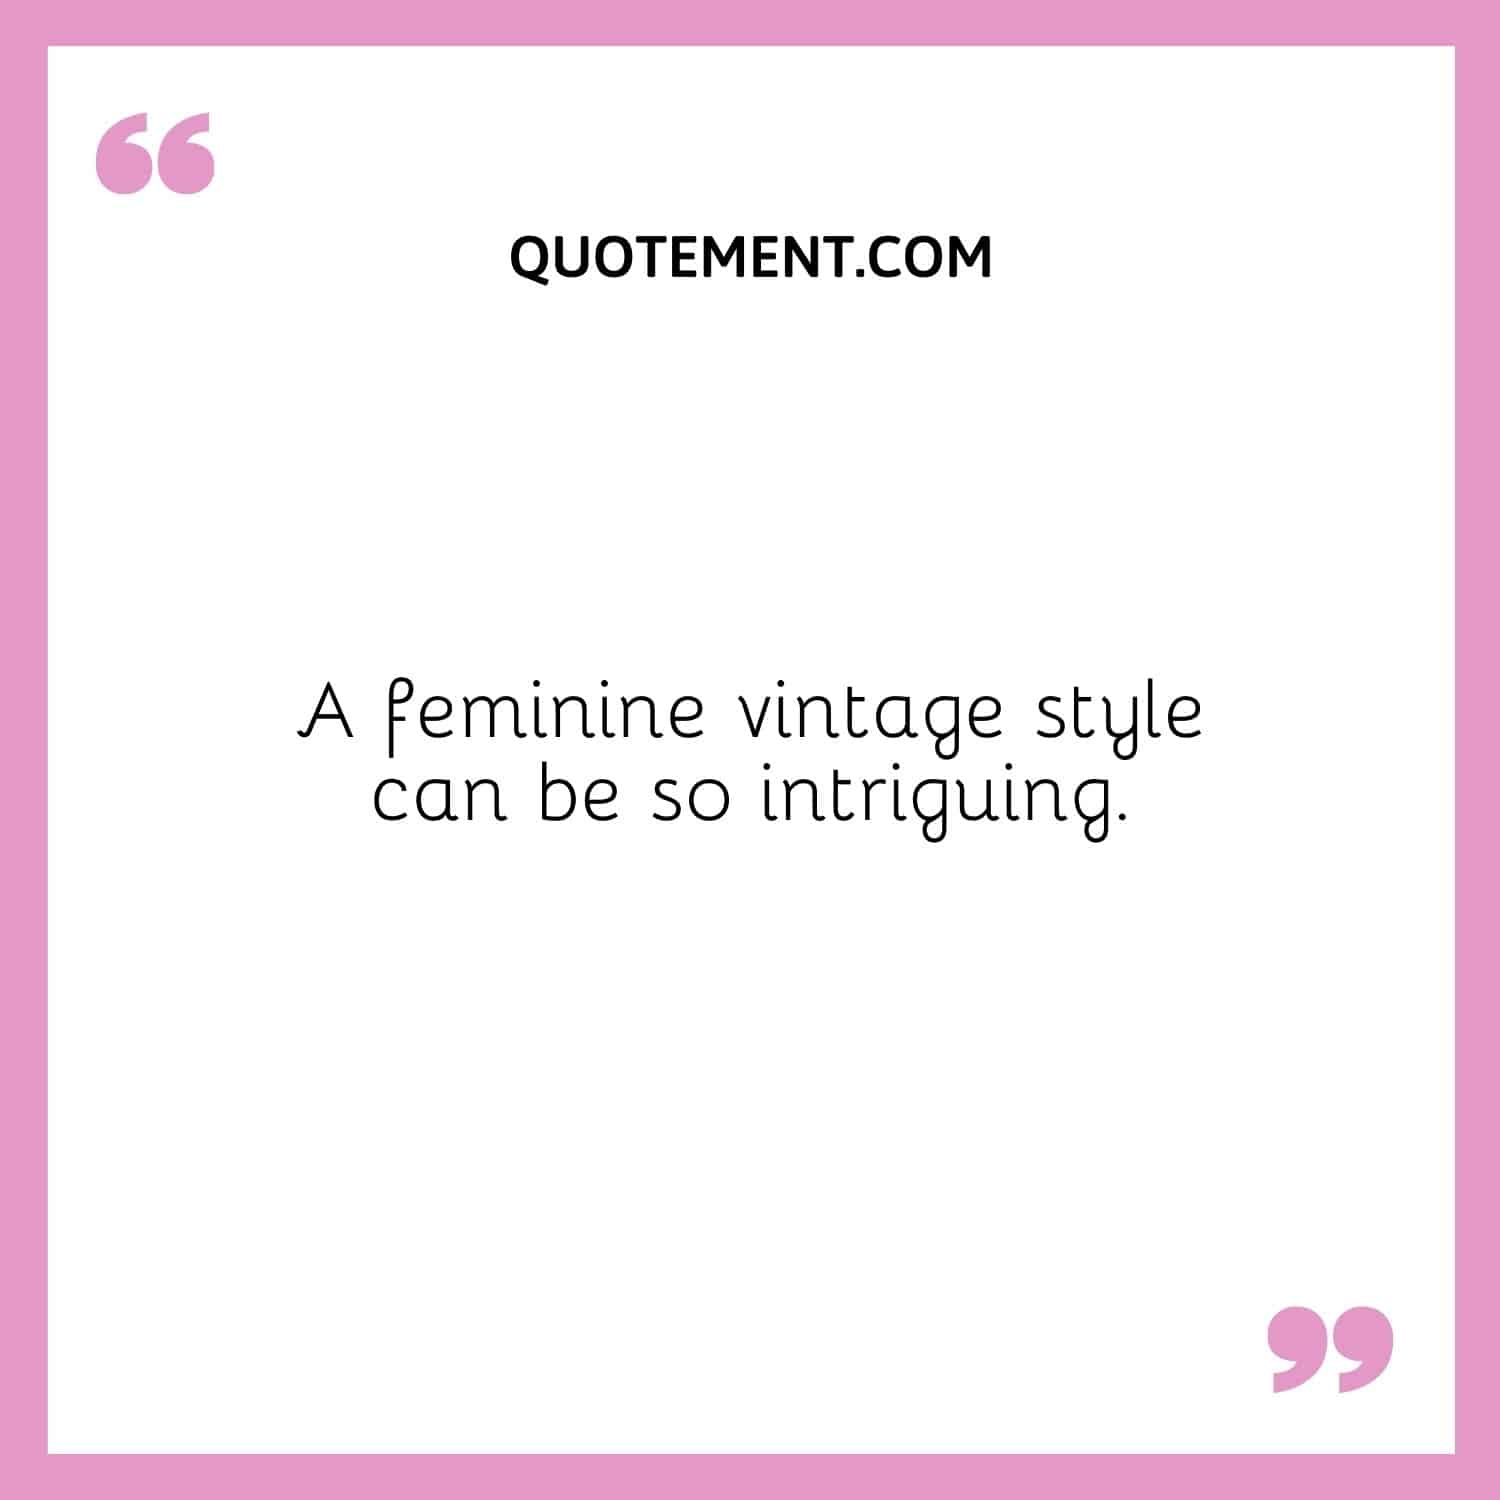 A feminine vintage style can be so intriguing.